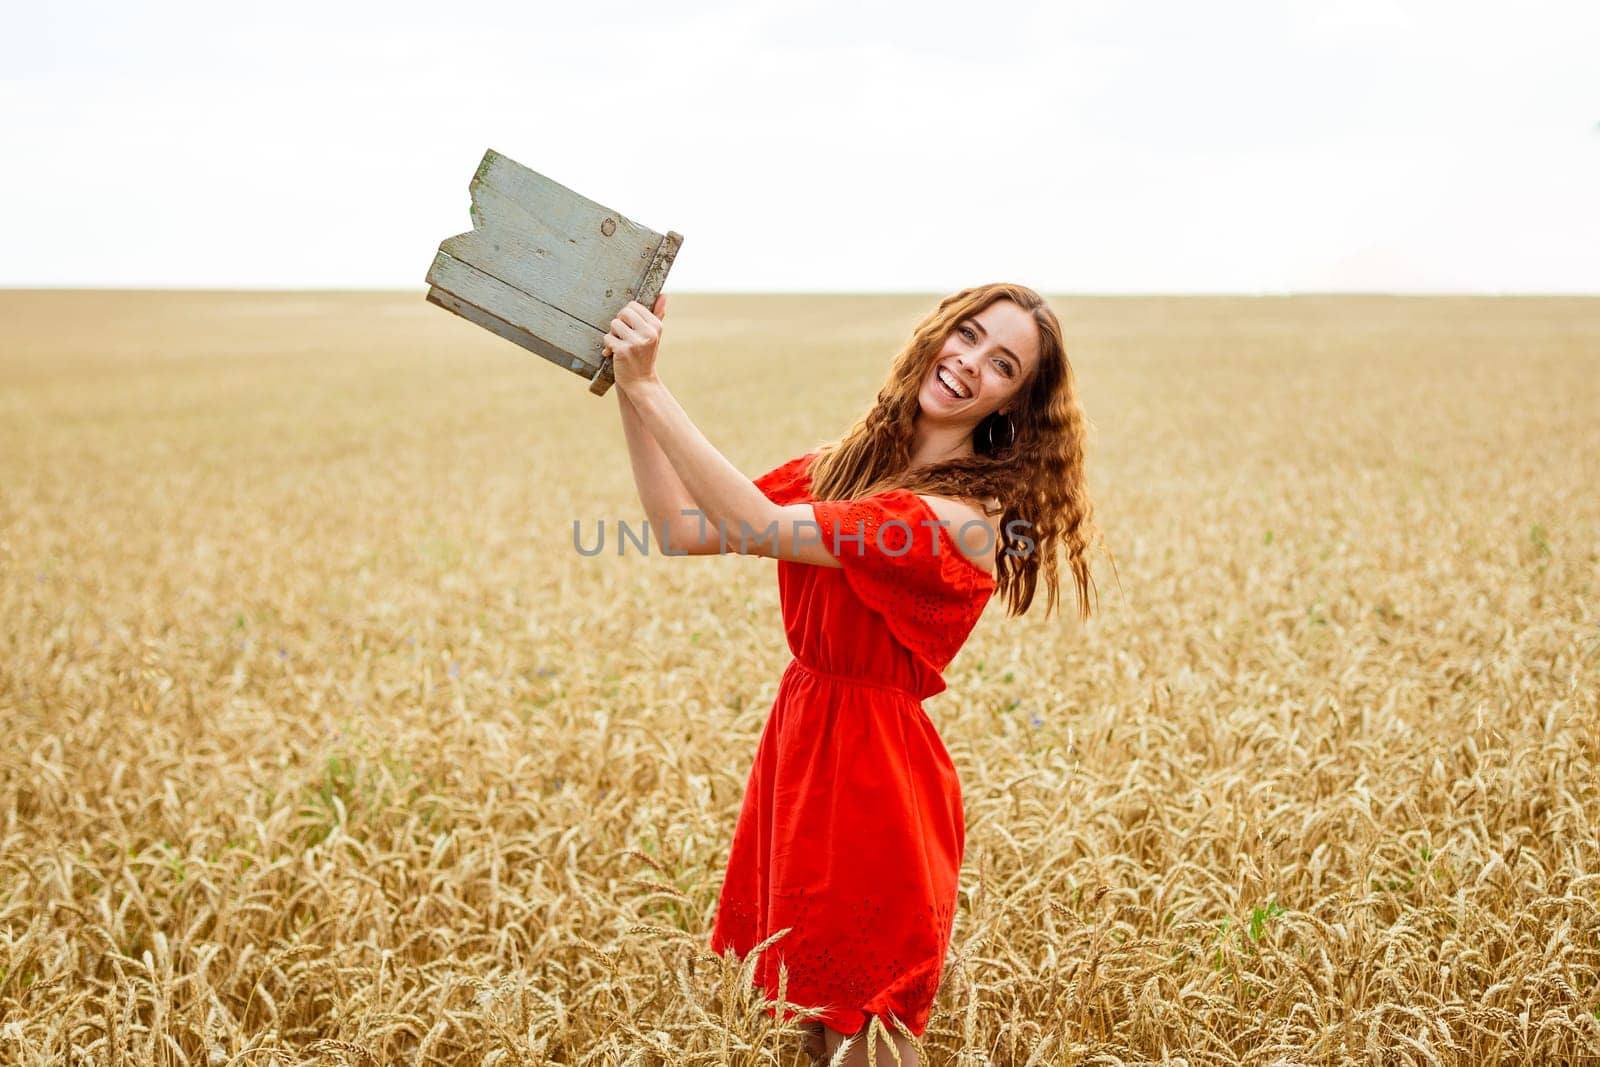 Style redhead young woman in red dress tay view yellow wheat field Happy girl with curly hair in field. Sweet smile on face of lovely free girl. Caucasian real girl. Happy woman enjoying freedom.